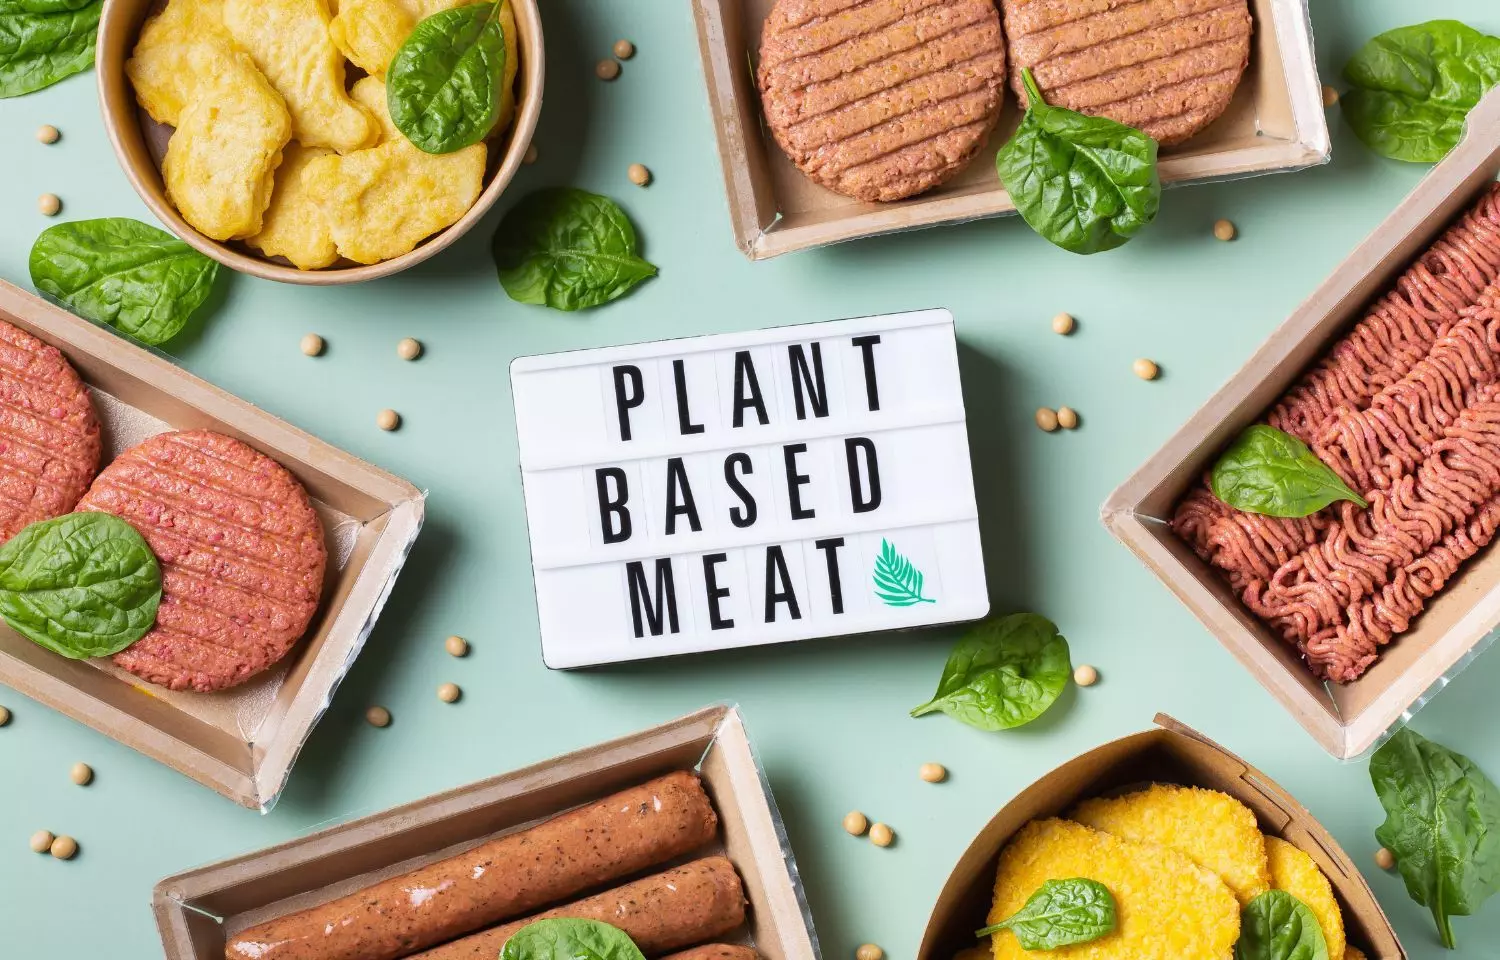 Plant-based meat healthier and more sustainable than animal products